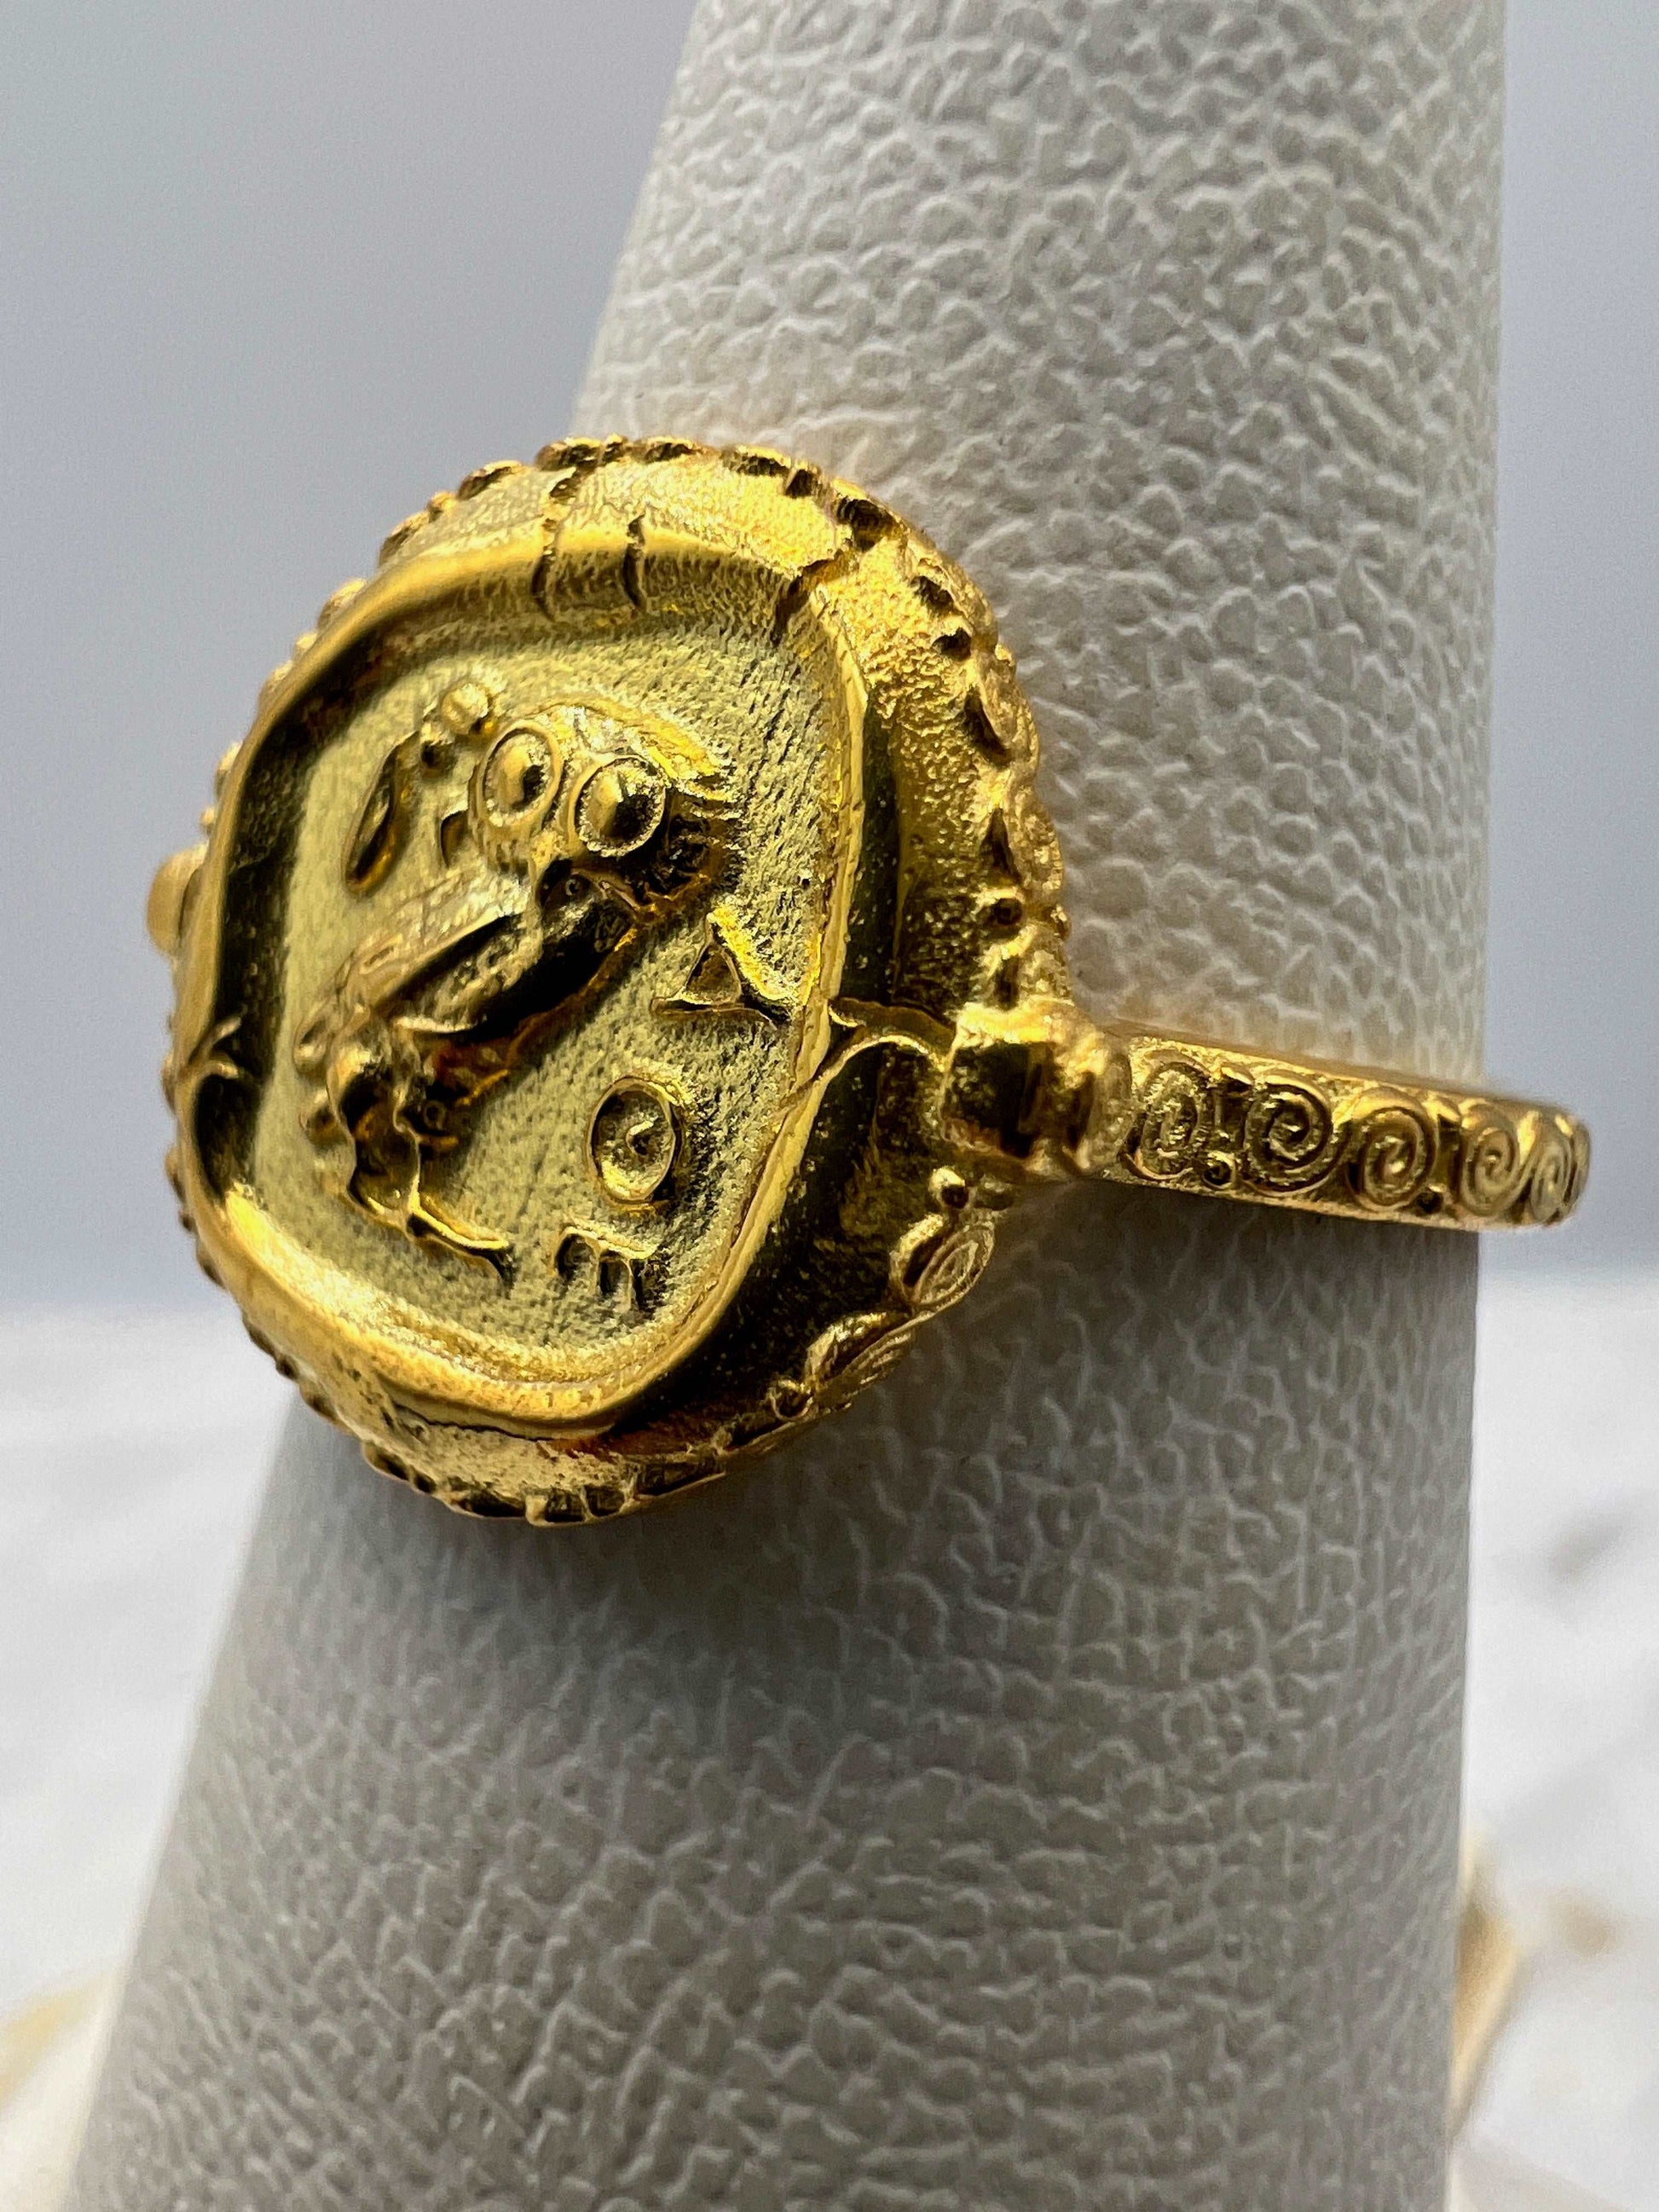 Athena owl Signet ring ancient Greek coin copy solid gold